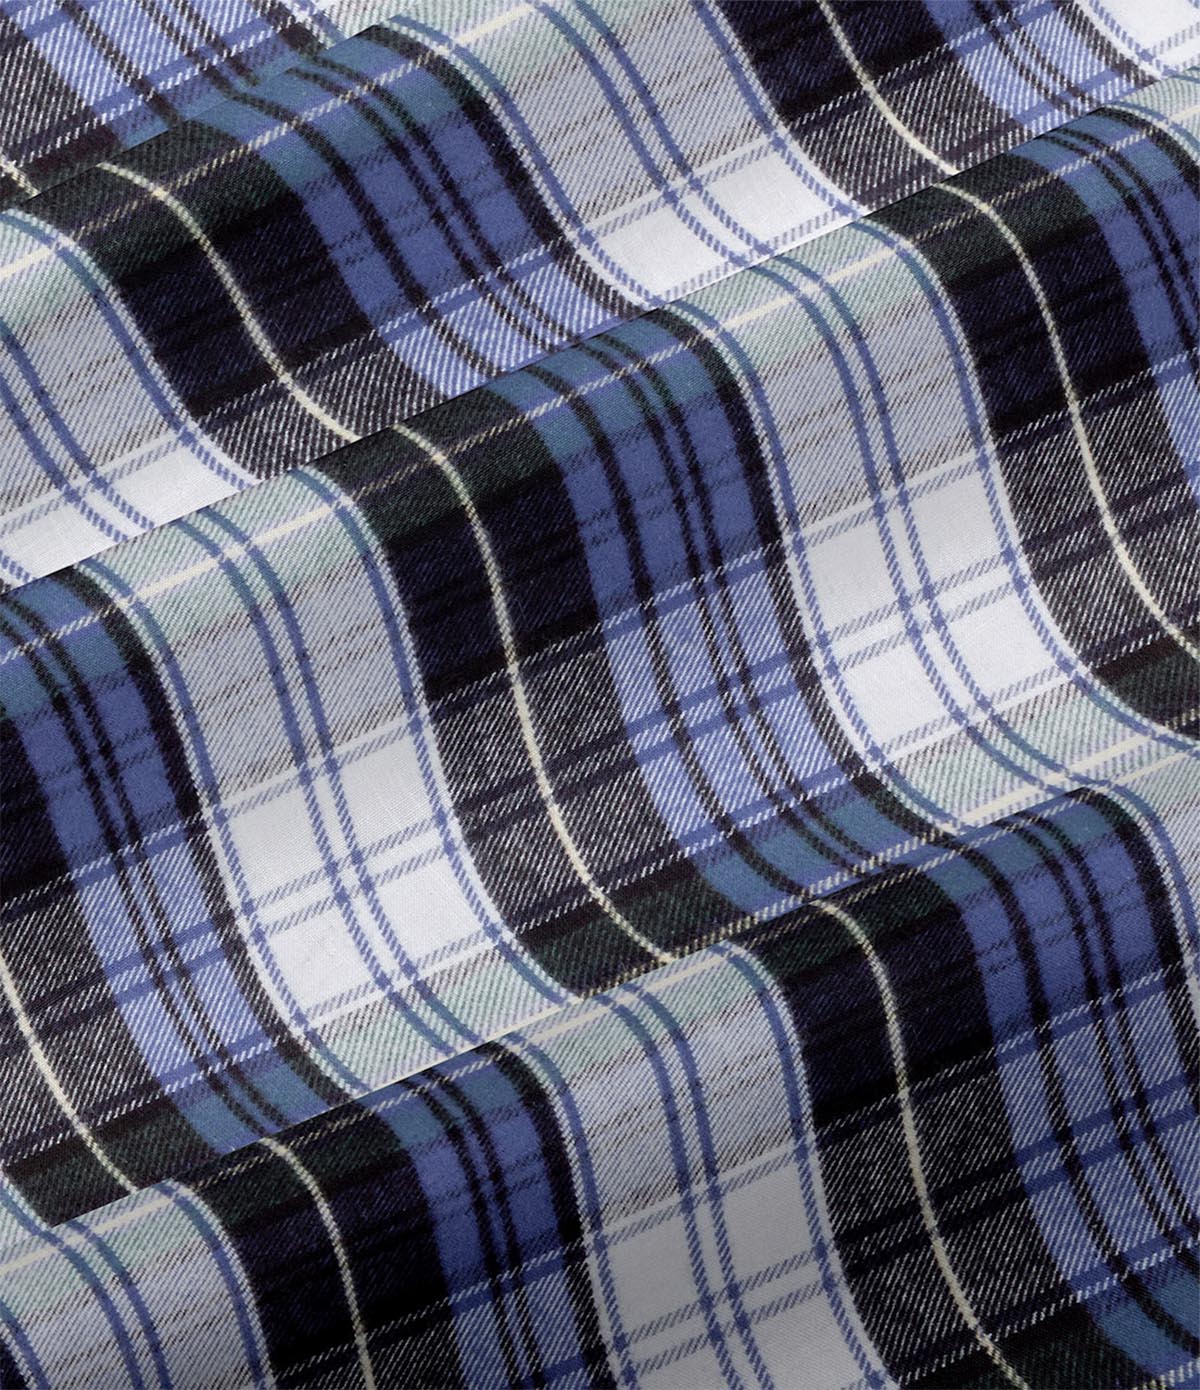 Organic Midweight Flannel Fabric By the Yard – The Vermont Flannel